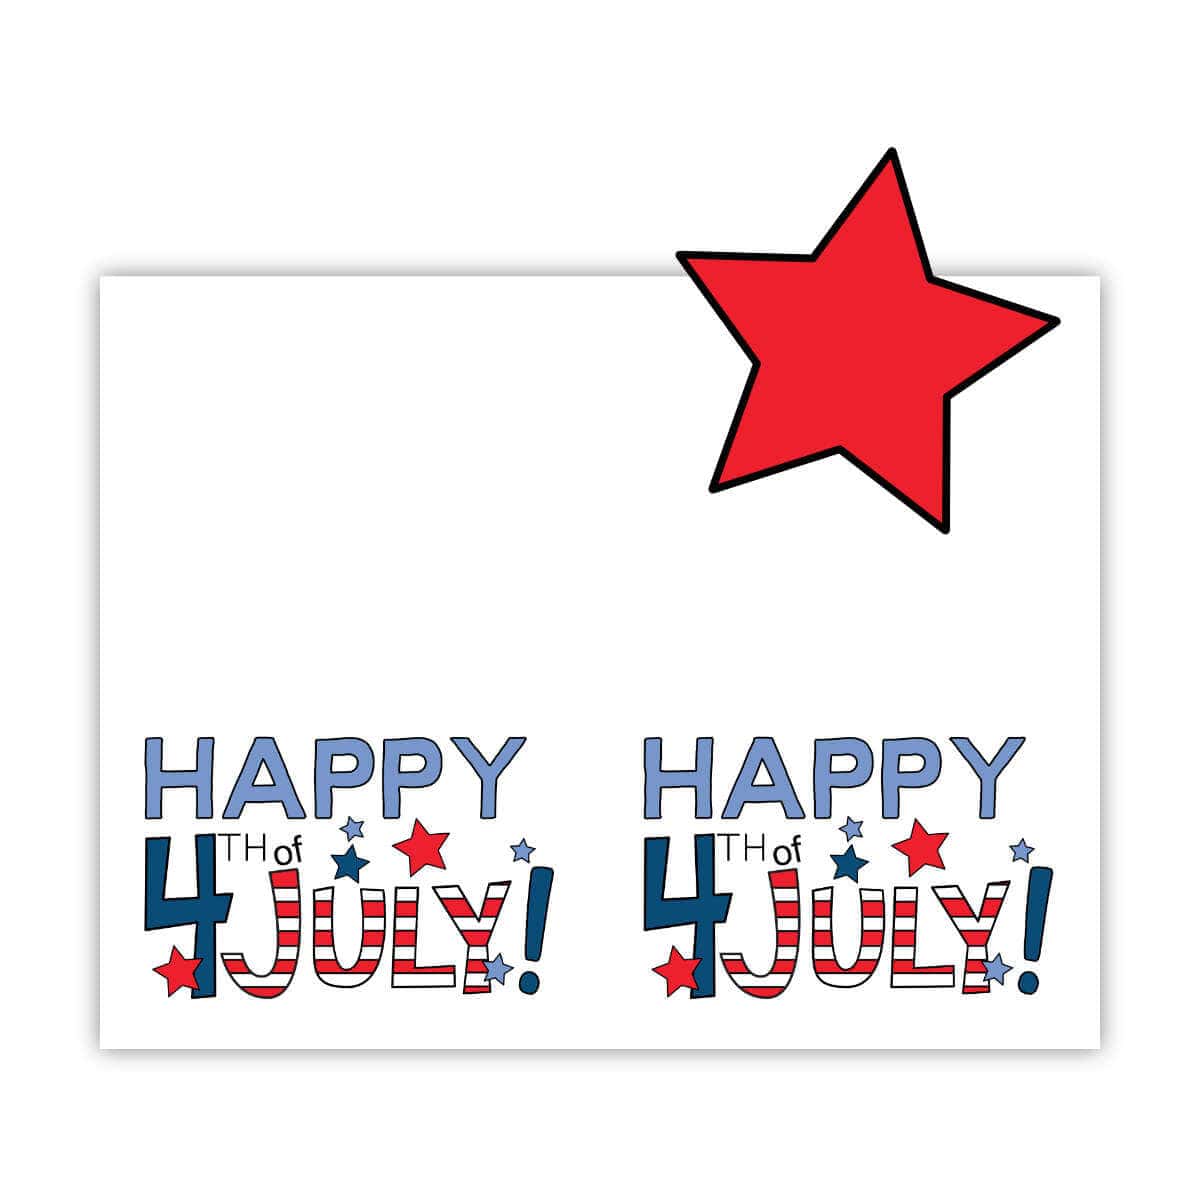 Printable Happy 4th of July Card with a red star clipart on the page.